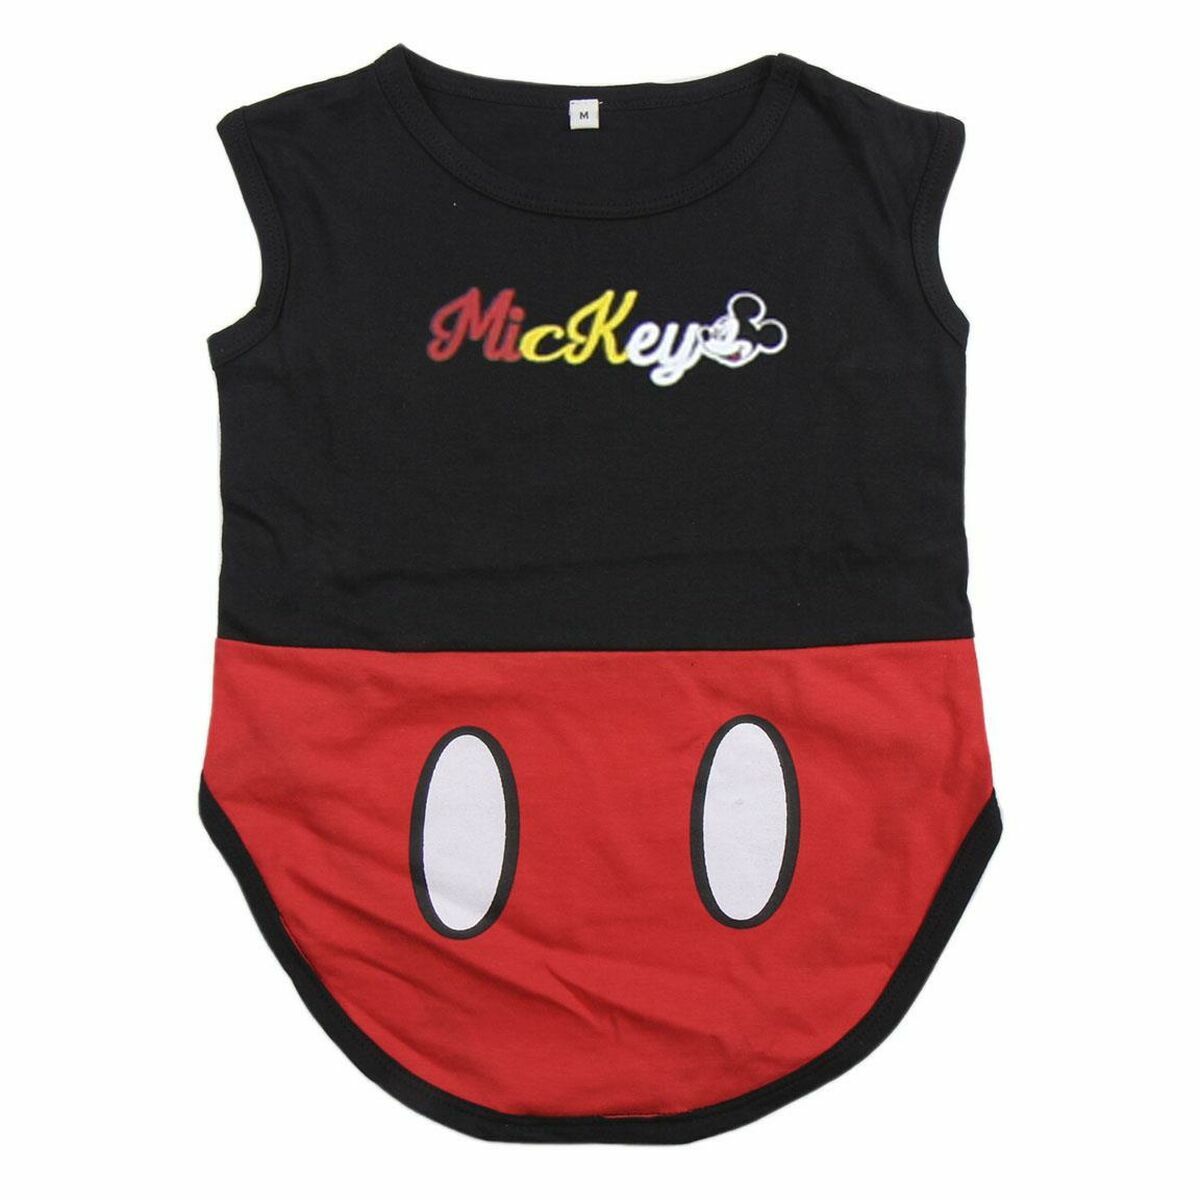 T-shirt pour Chien Mickey Mouse